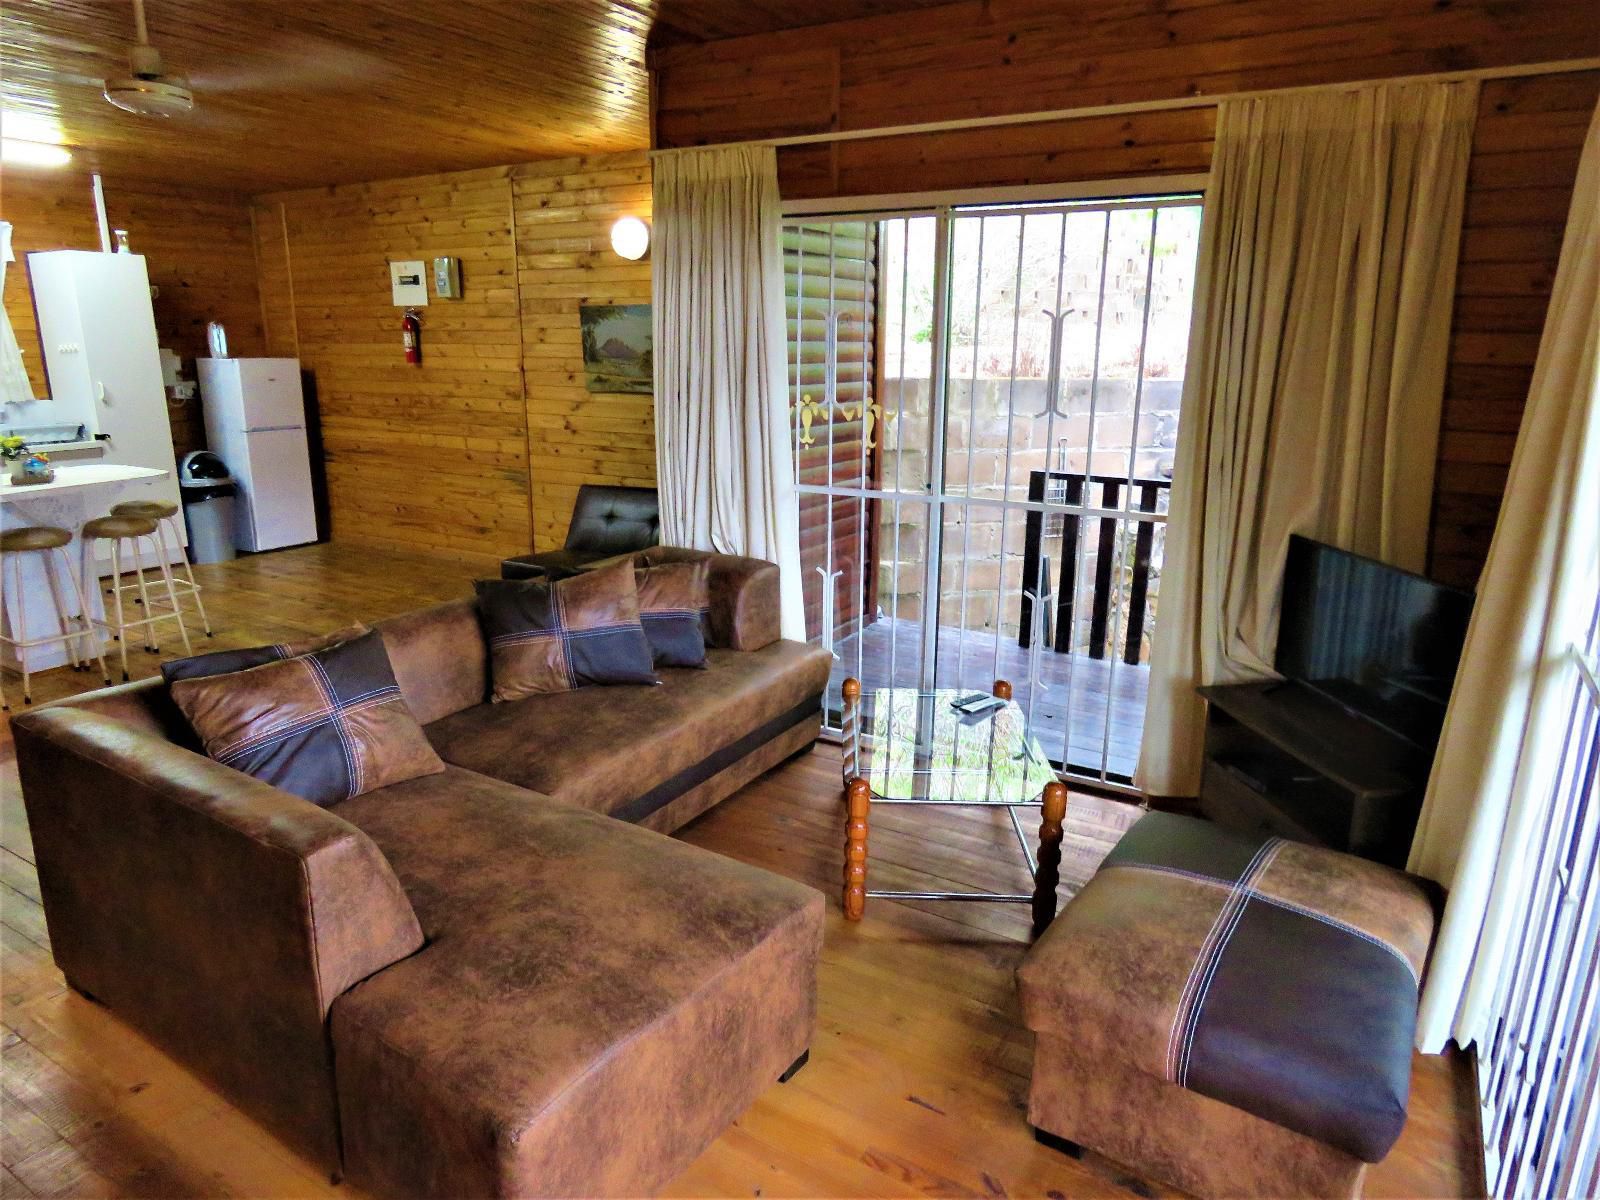 Impala Self Catering Chalets Numbi Park Hazyview Mpumalanga South Africa Living Room